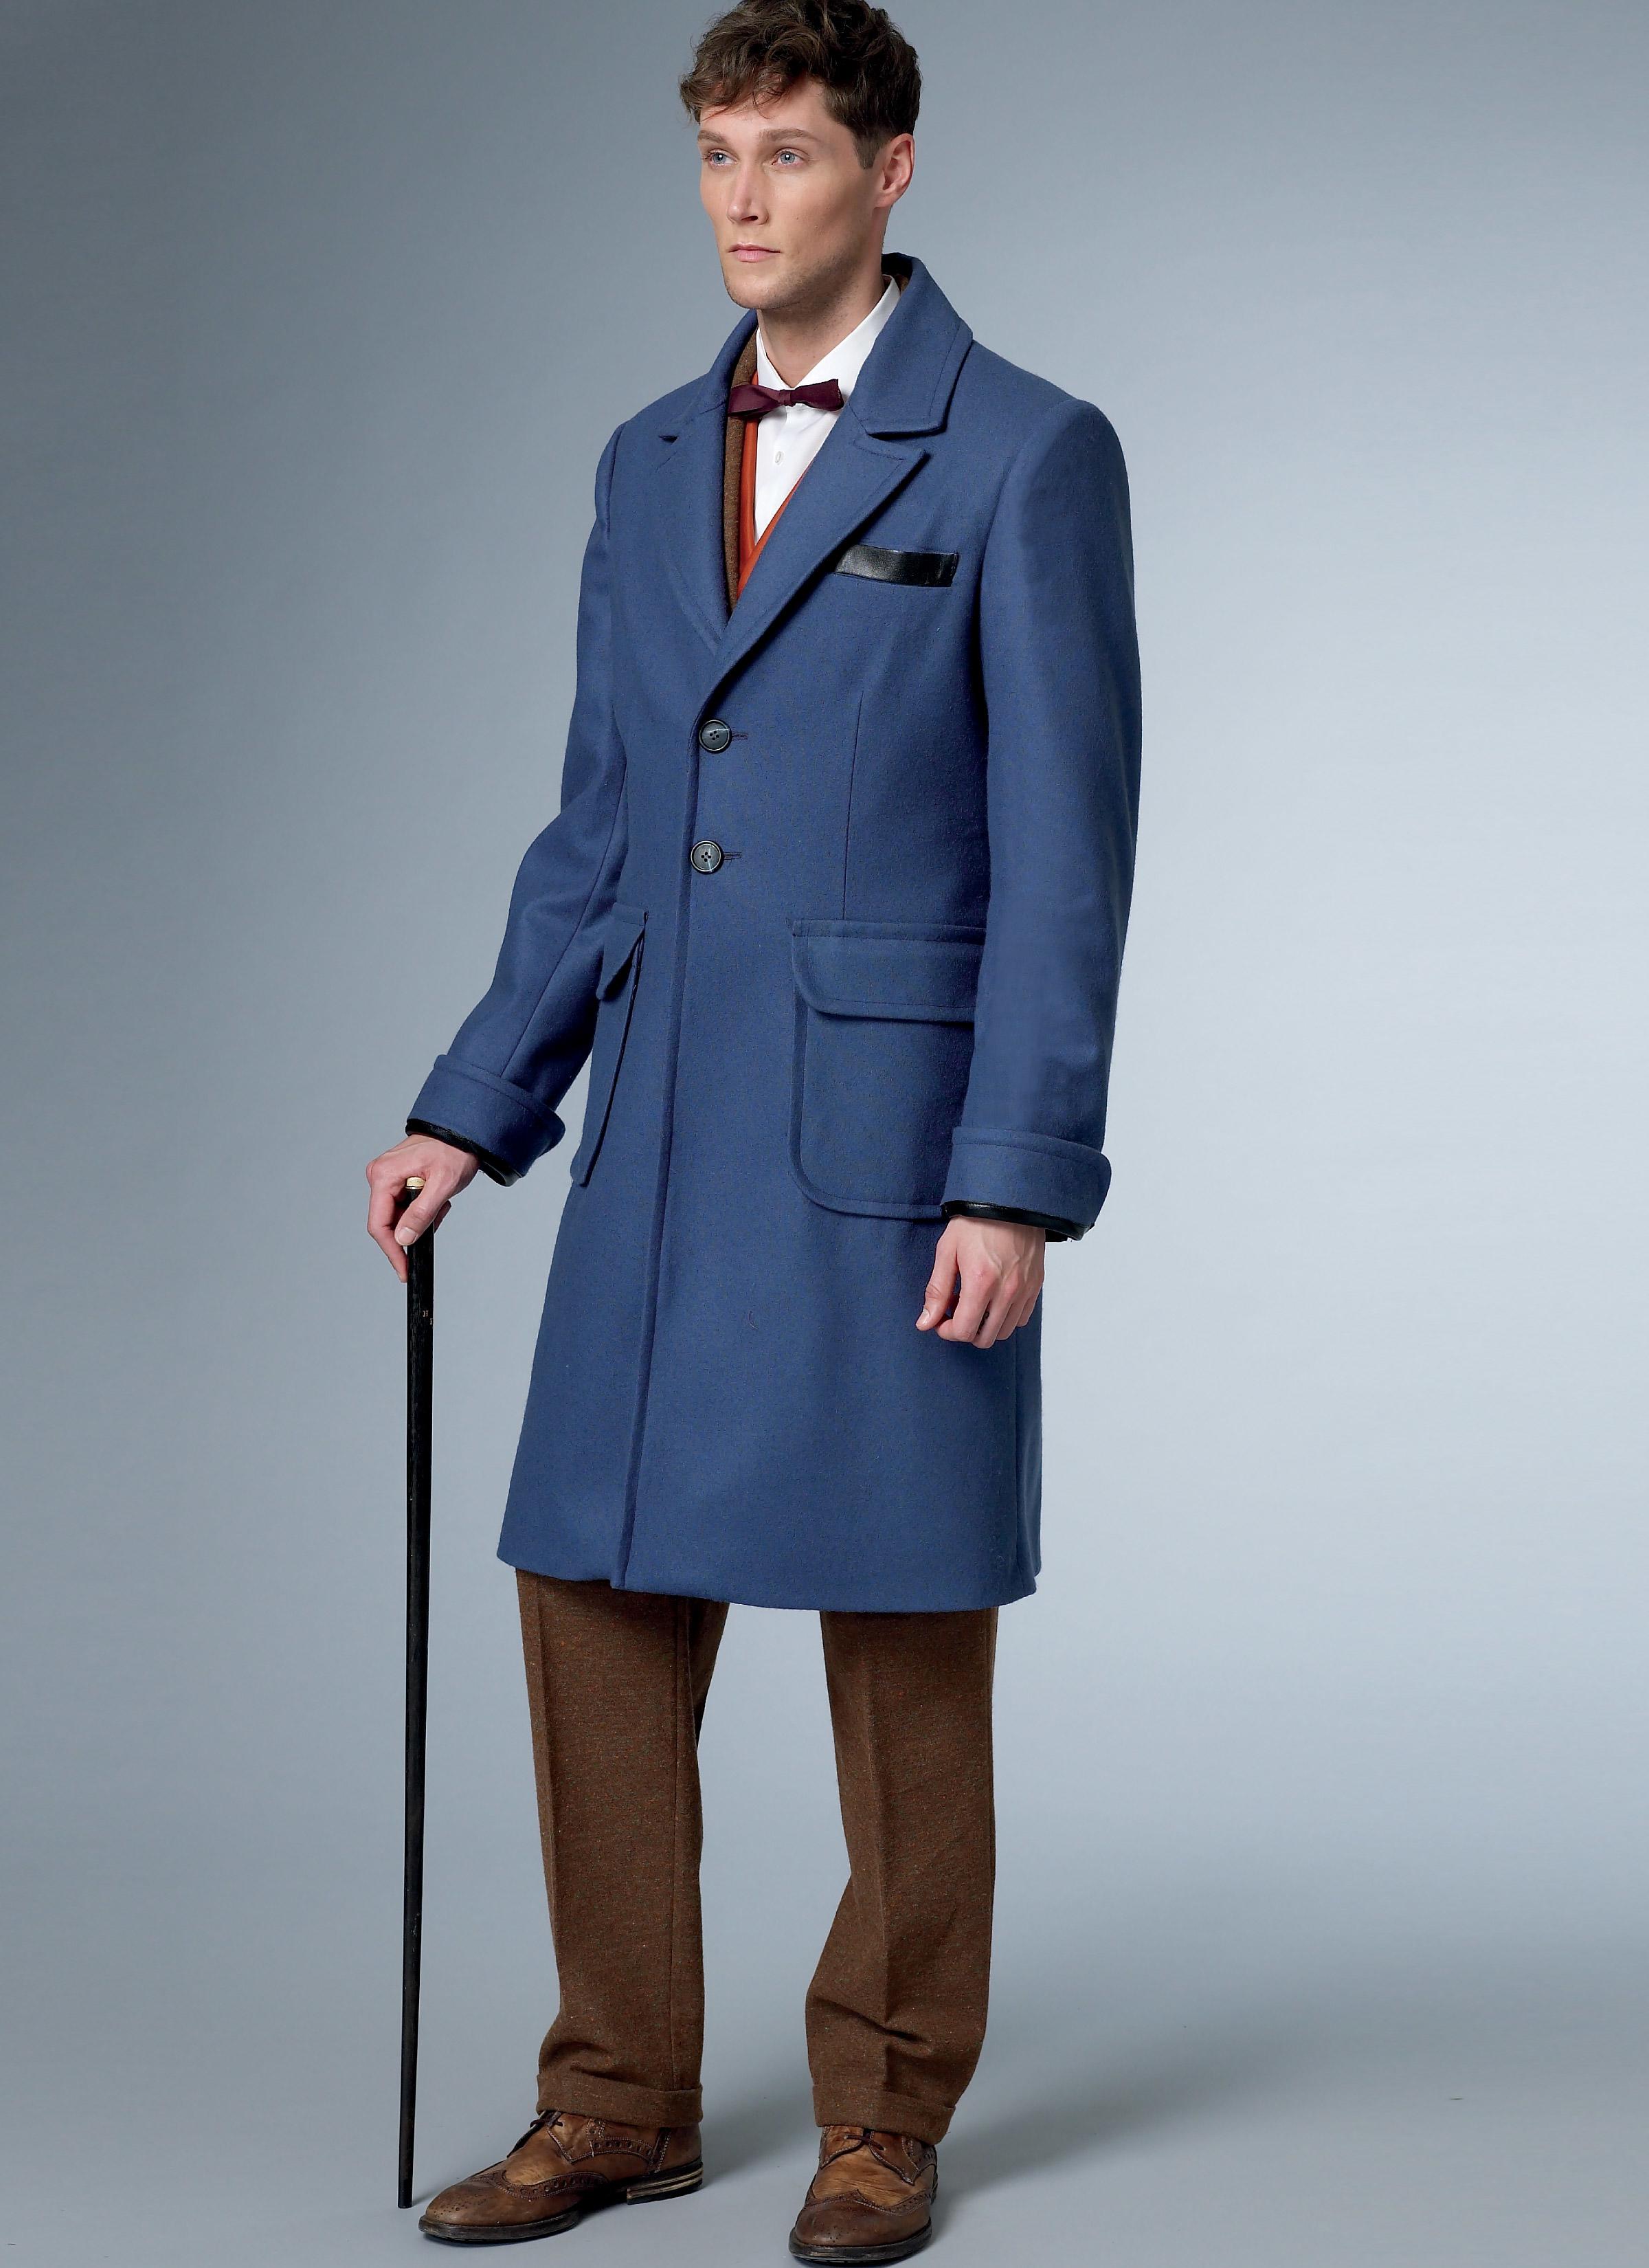 Butterick B6502 Men's Single-Breasted Lined Coat with Back Belt and Vest with Buckle